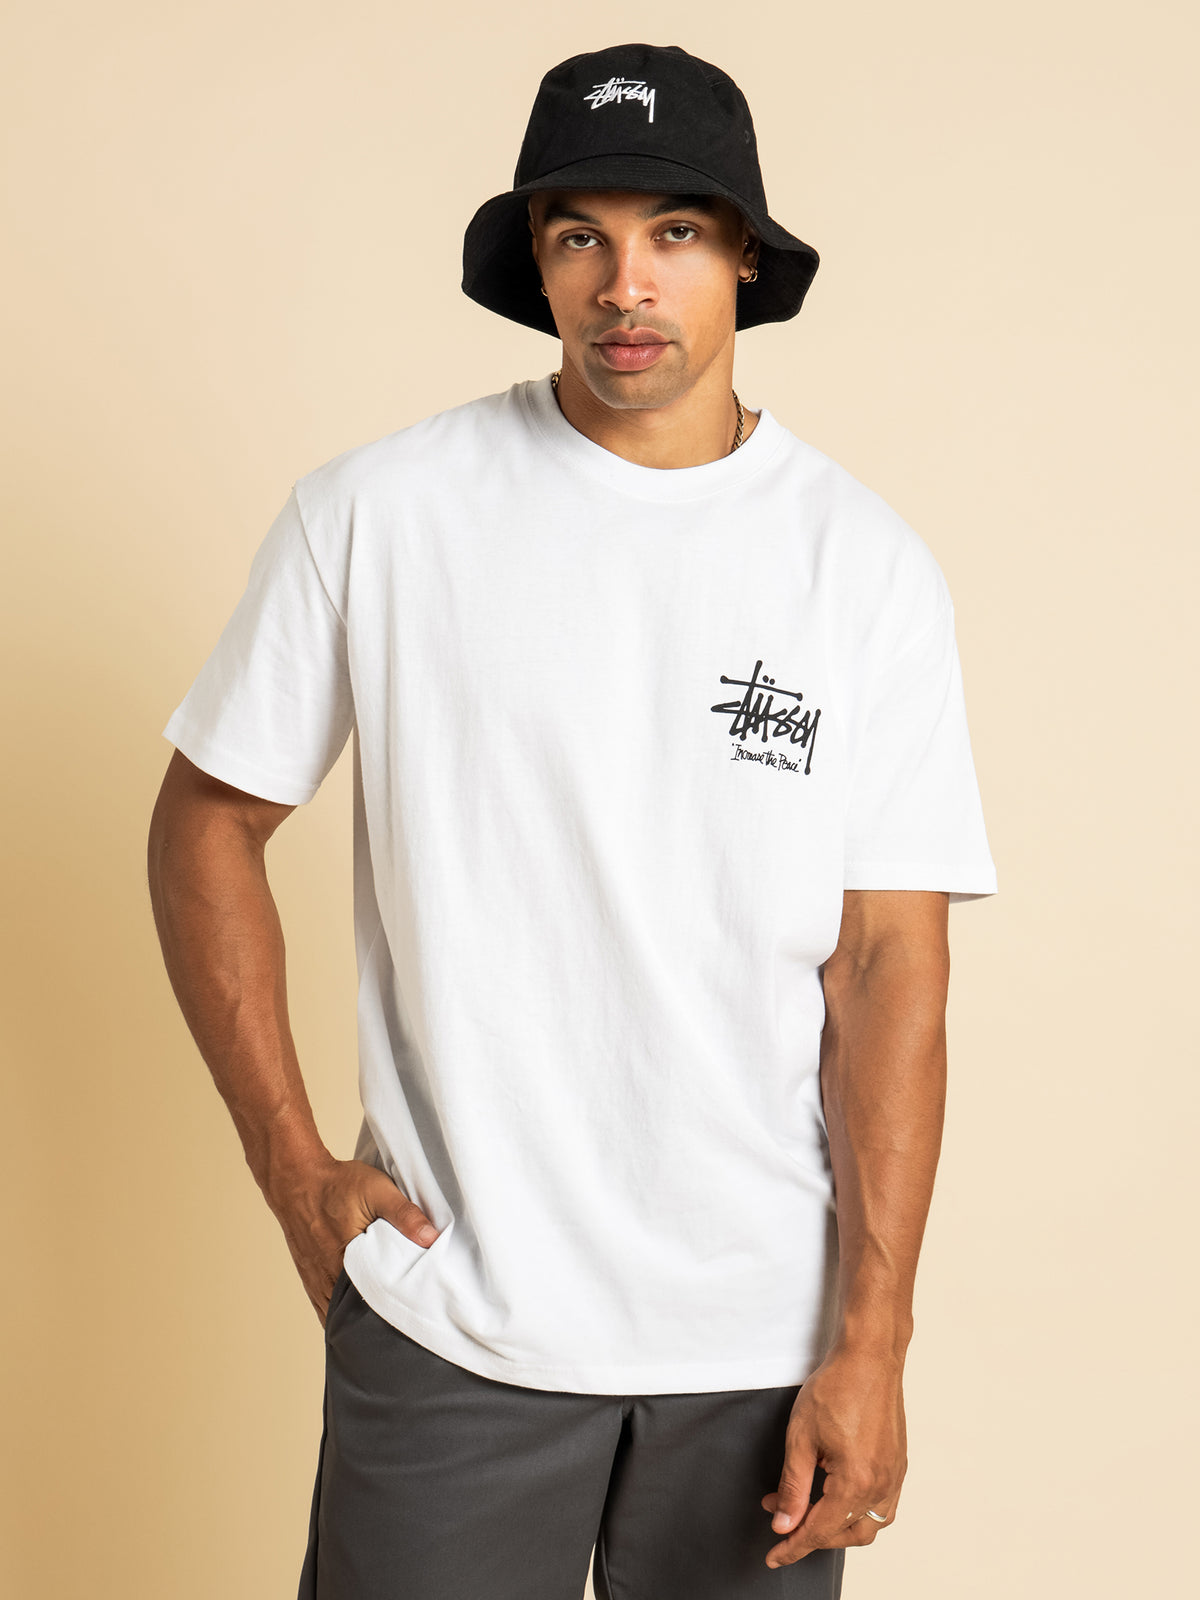 Increase The Peace T-Shirt in White